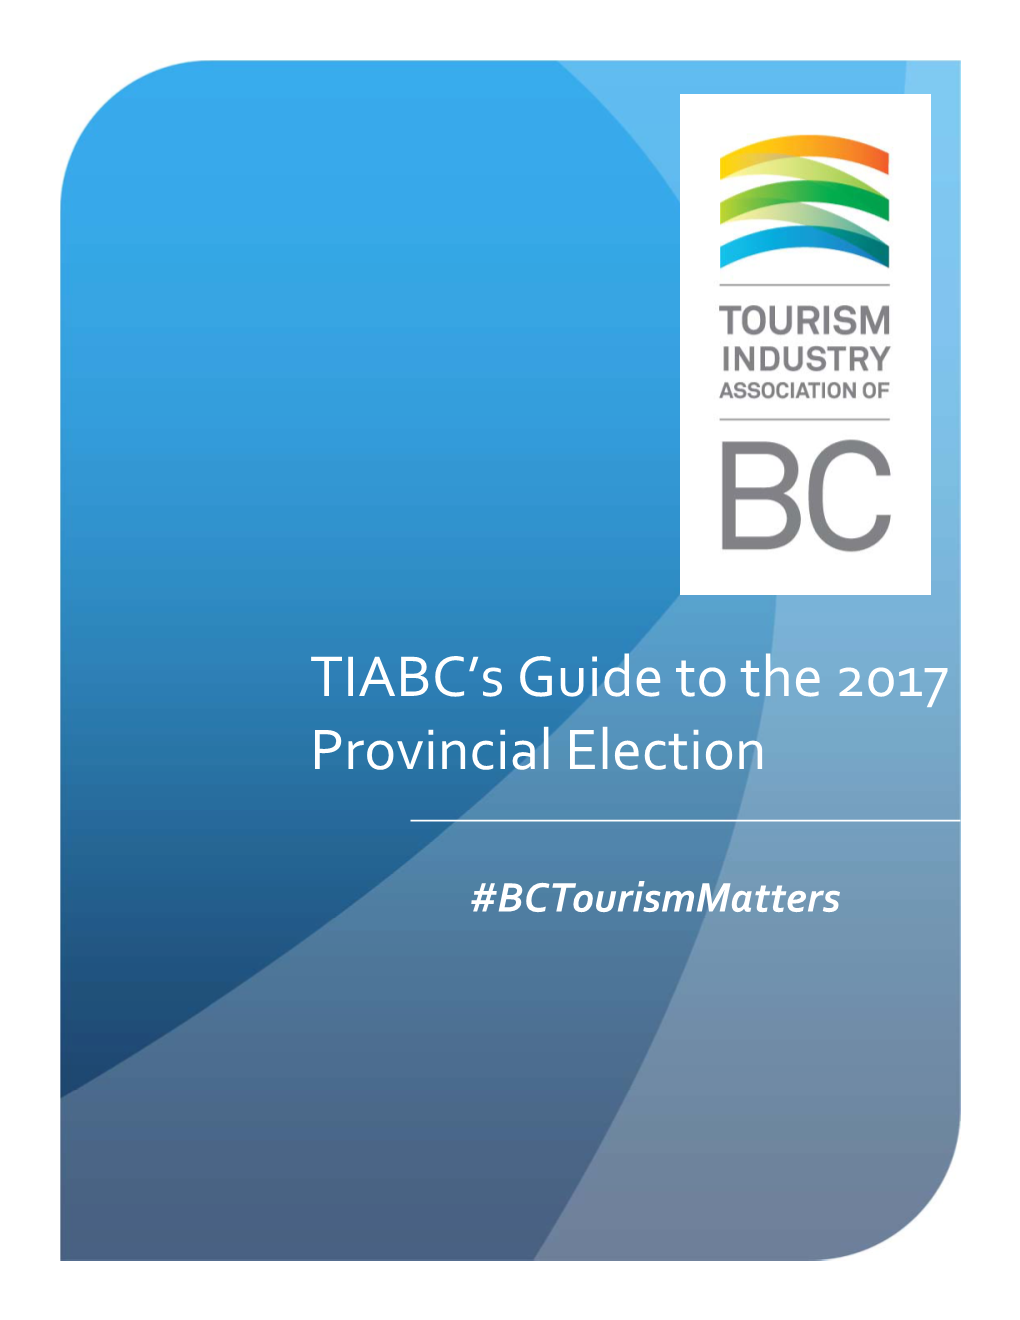 TIABC's Guide to the 2017 Provincial Election